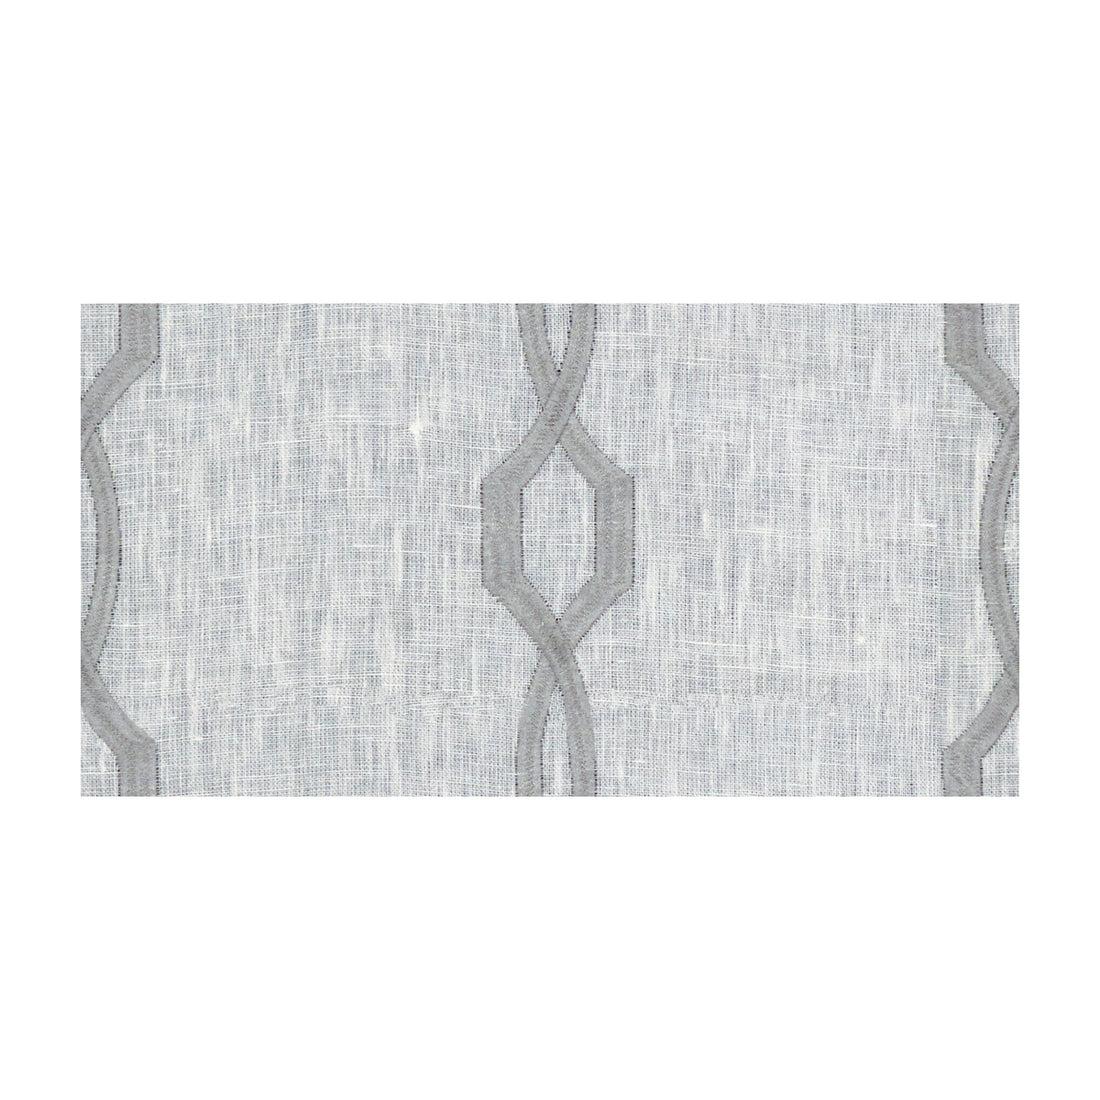 Teton fabric in smoke color - pattern 4187.11.0 - by Kravet Design in the Candice Olson collection